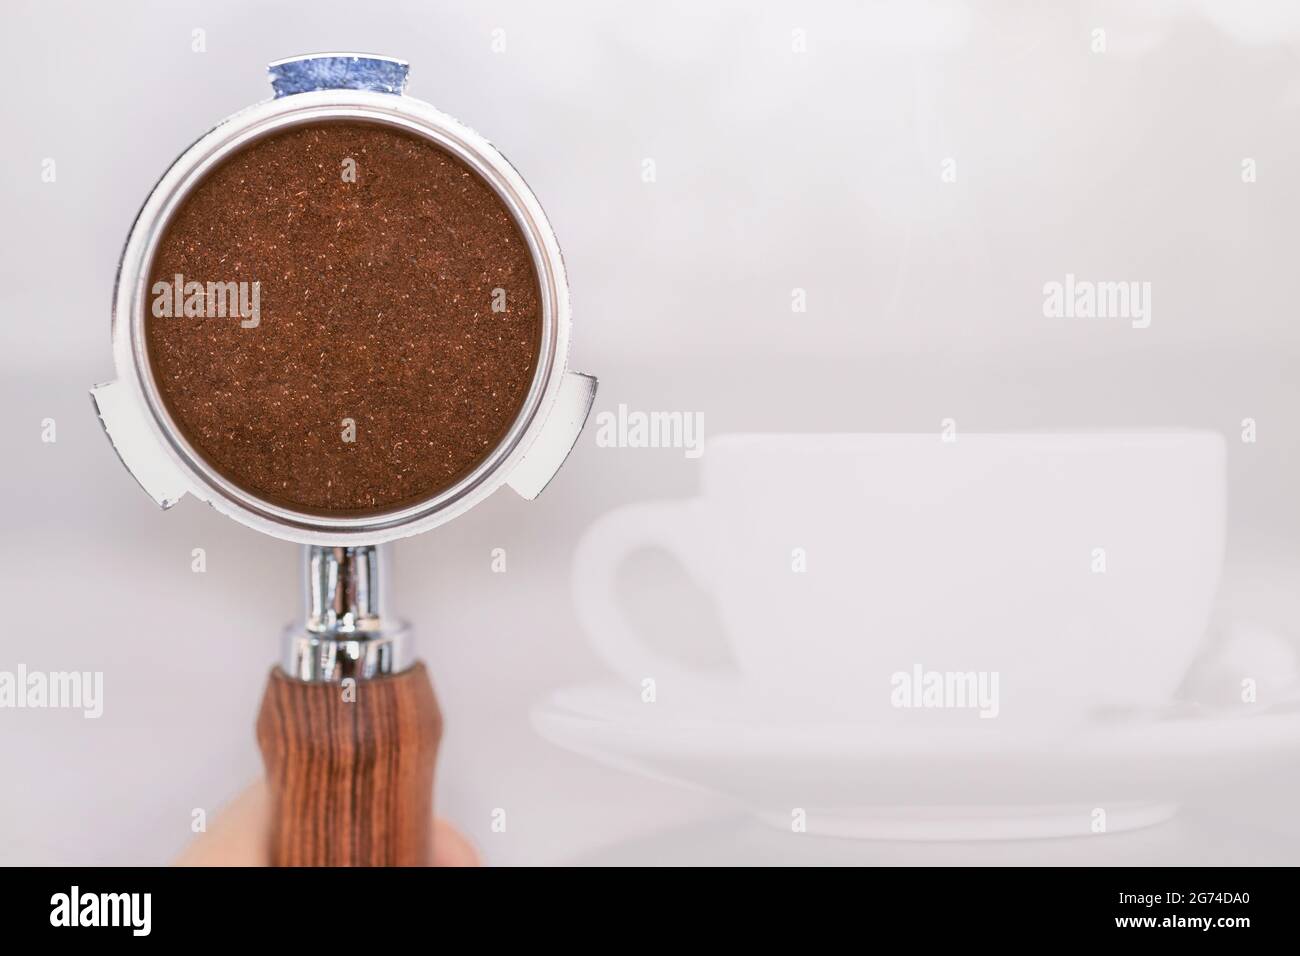 Ground coffee powder in portafilter with space for cafe text and coffee mug background. Stock Photo